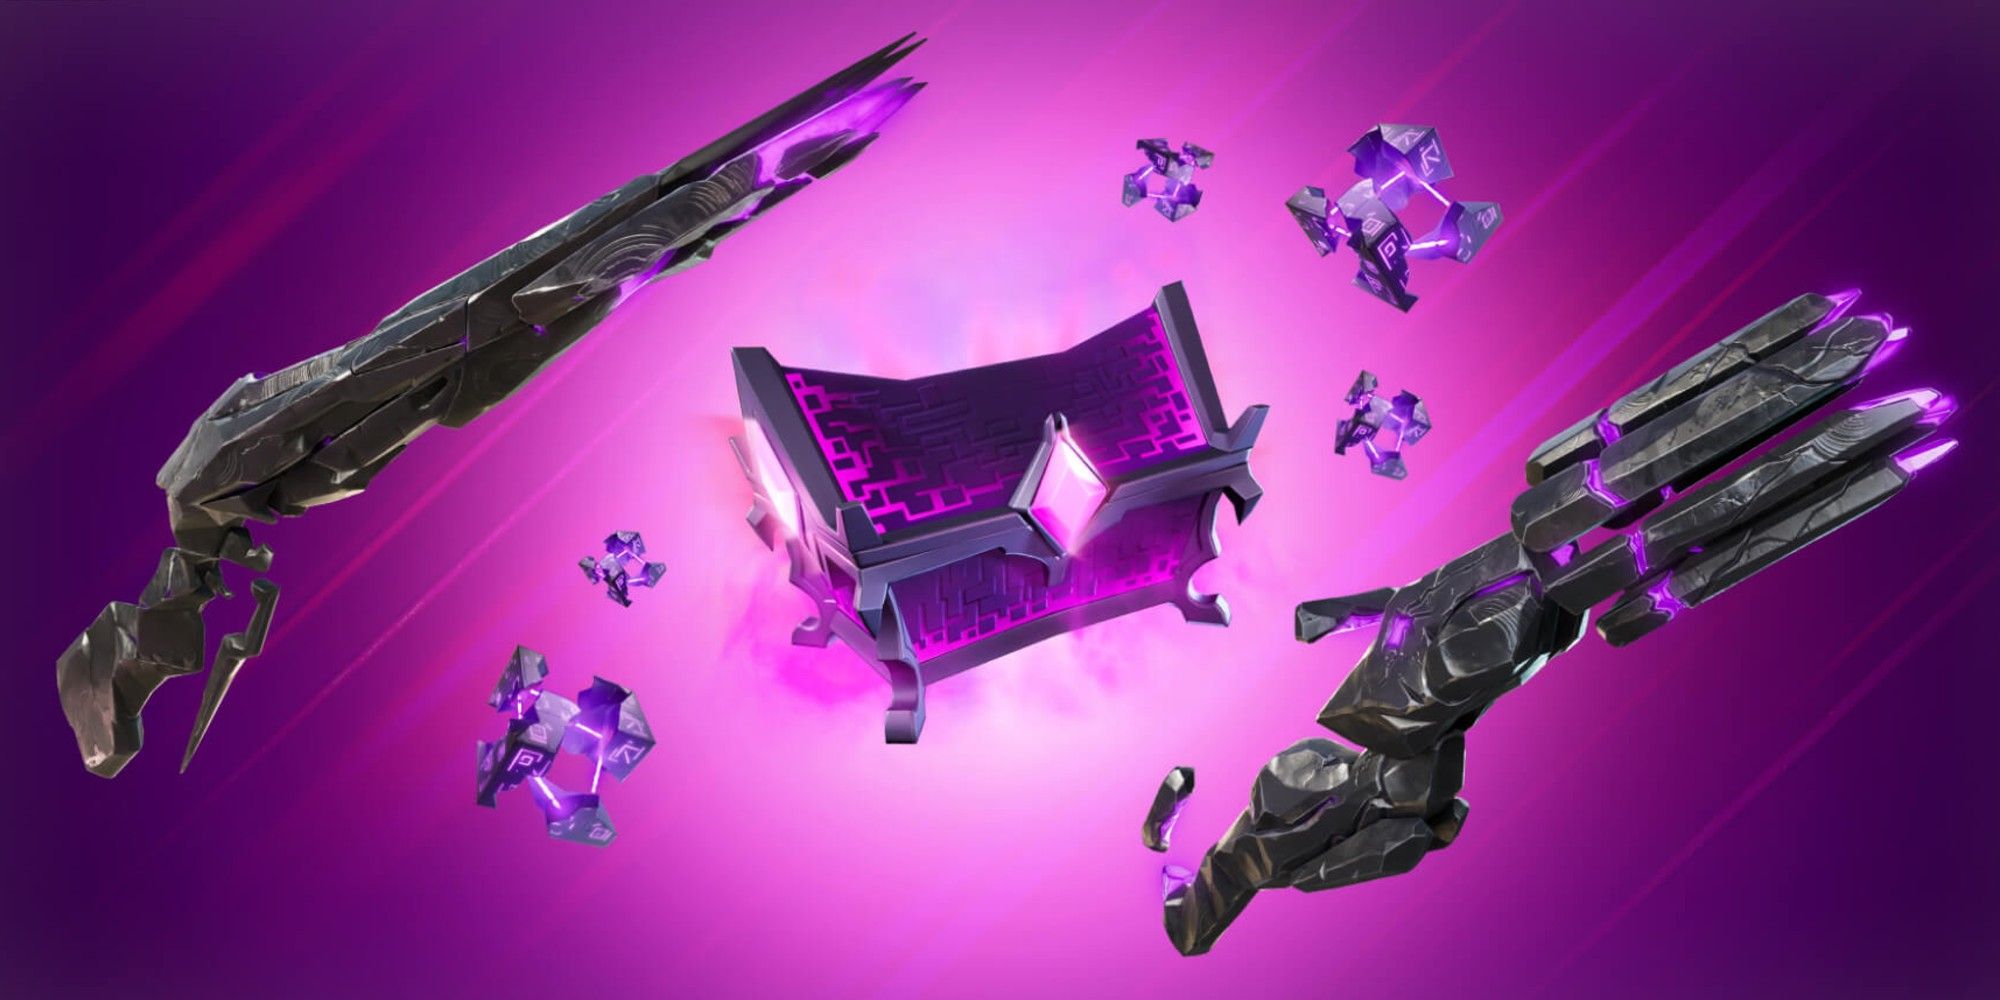 Weapons from Chapter 2 of Season 8 in Fornite game.